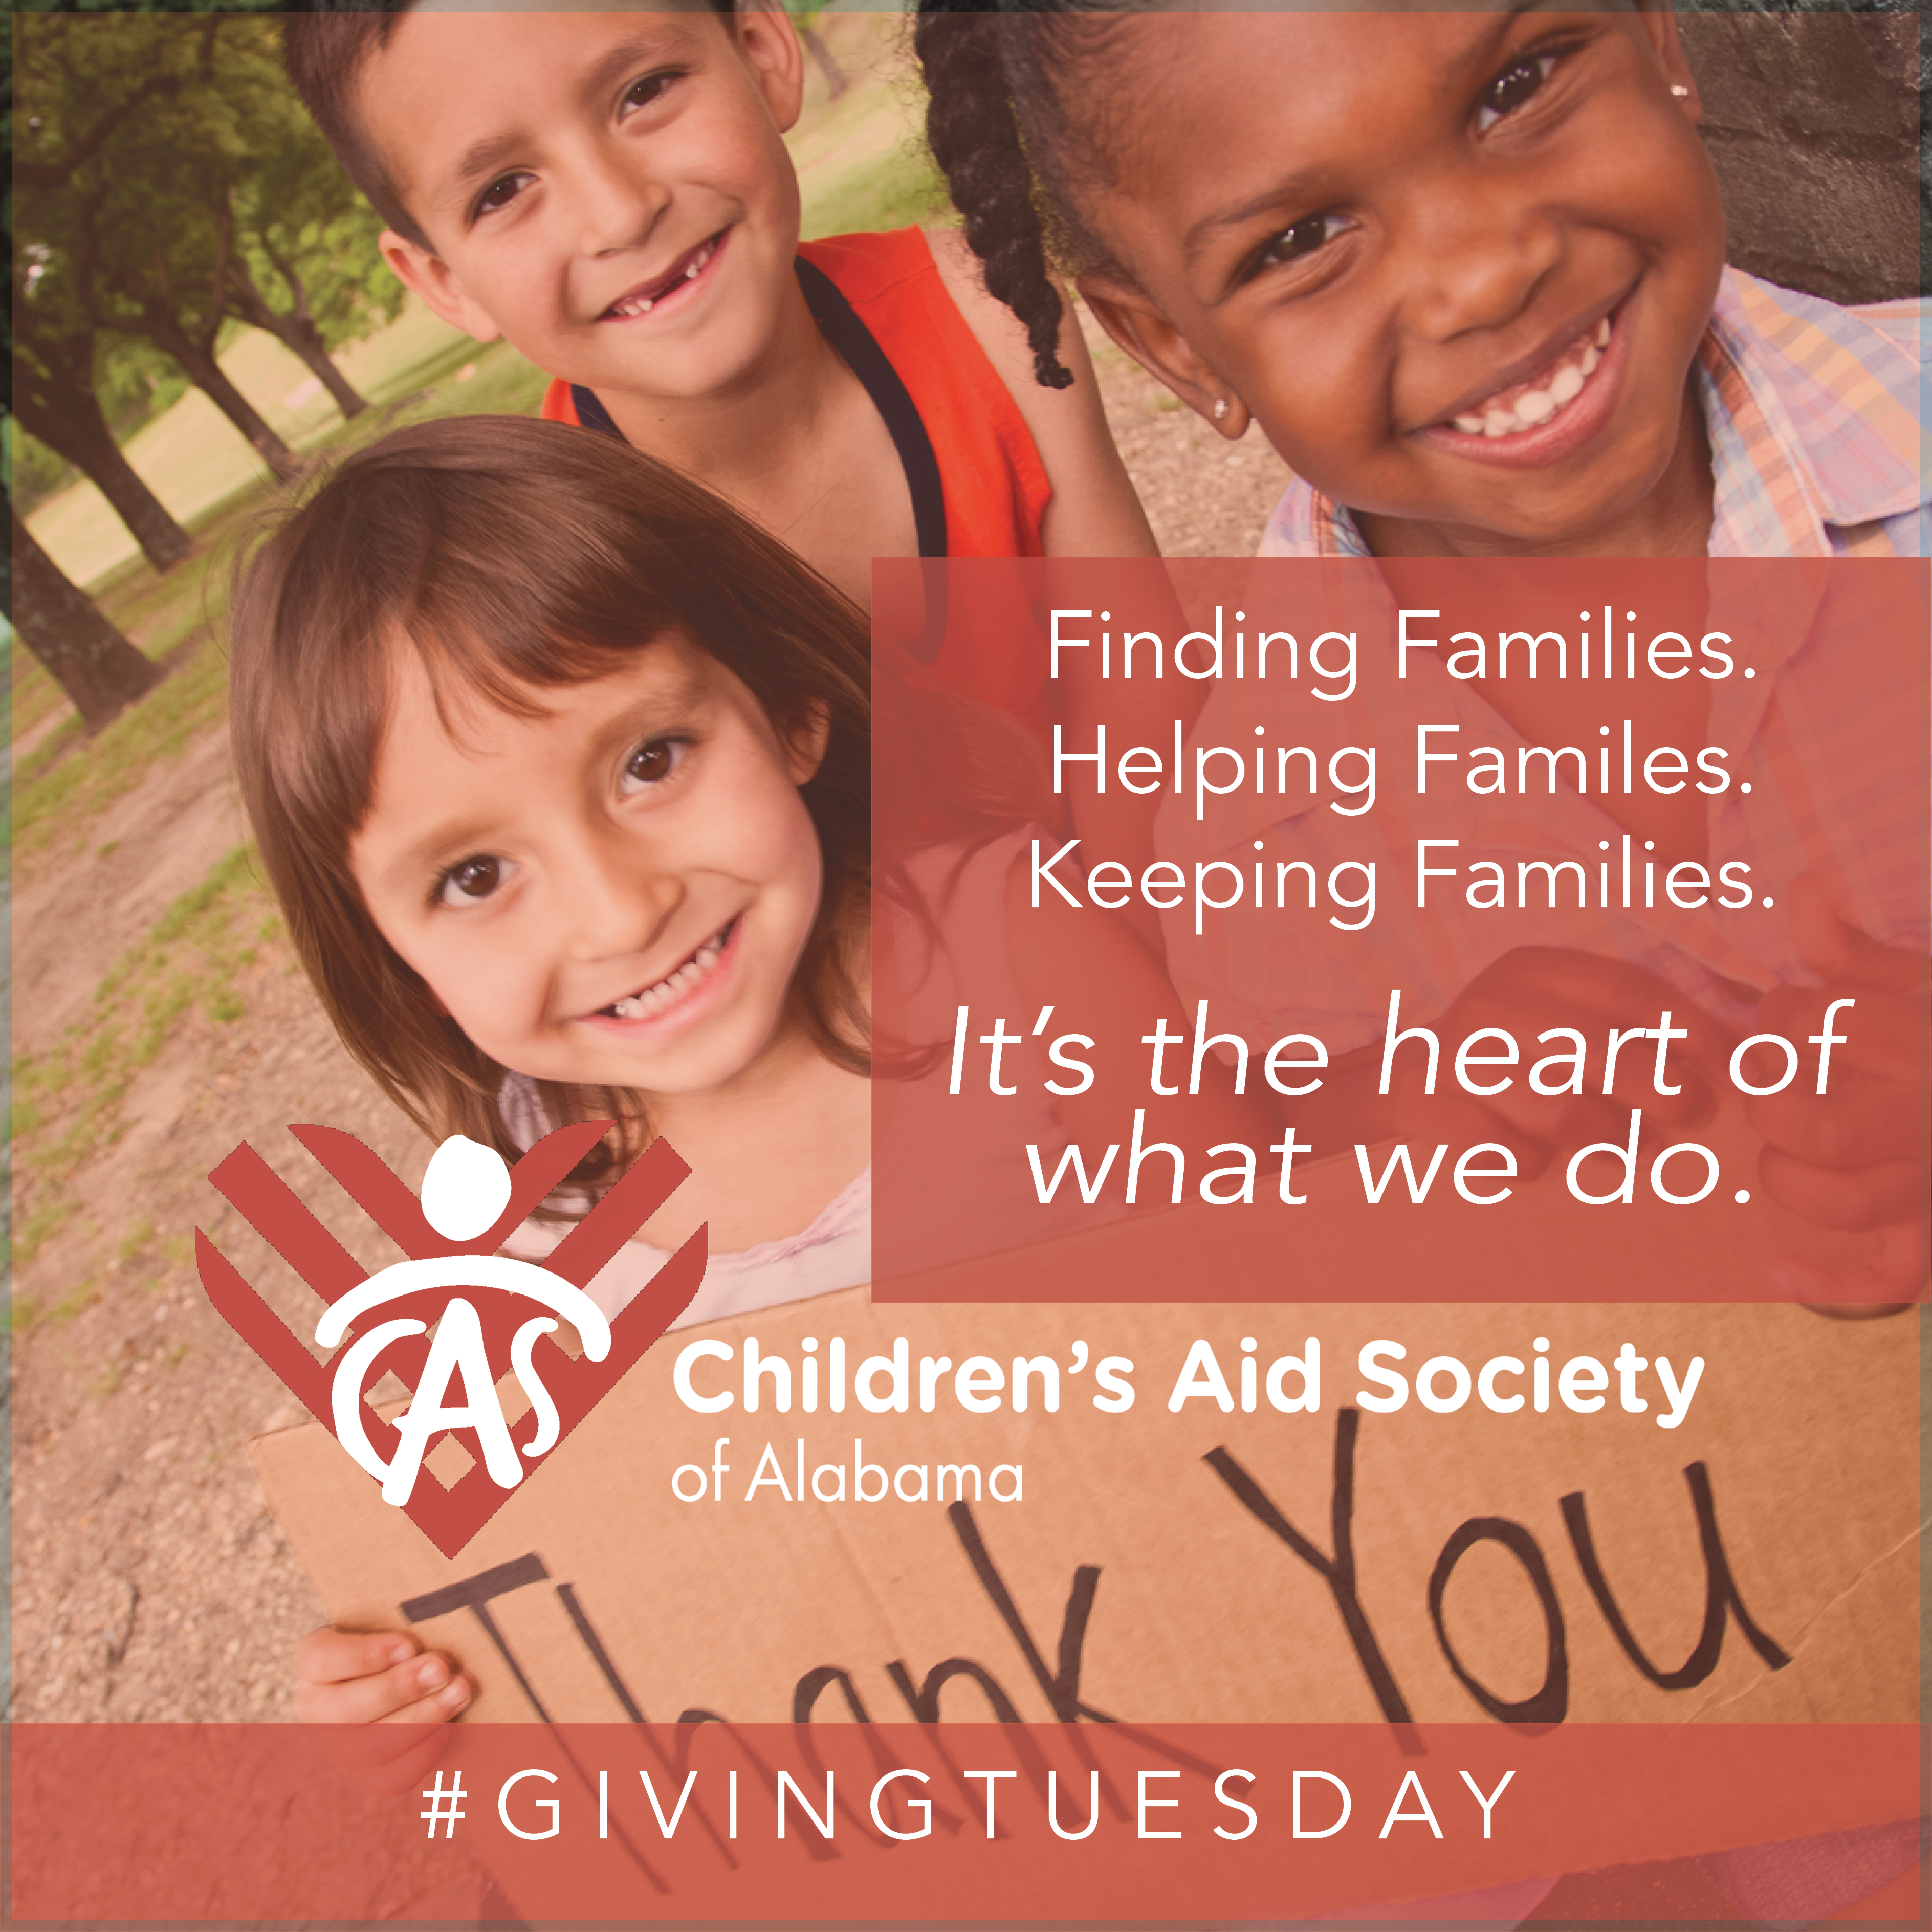 Consider Partnering with us on Giving Tuesday!